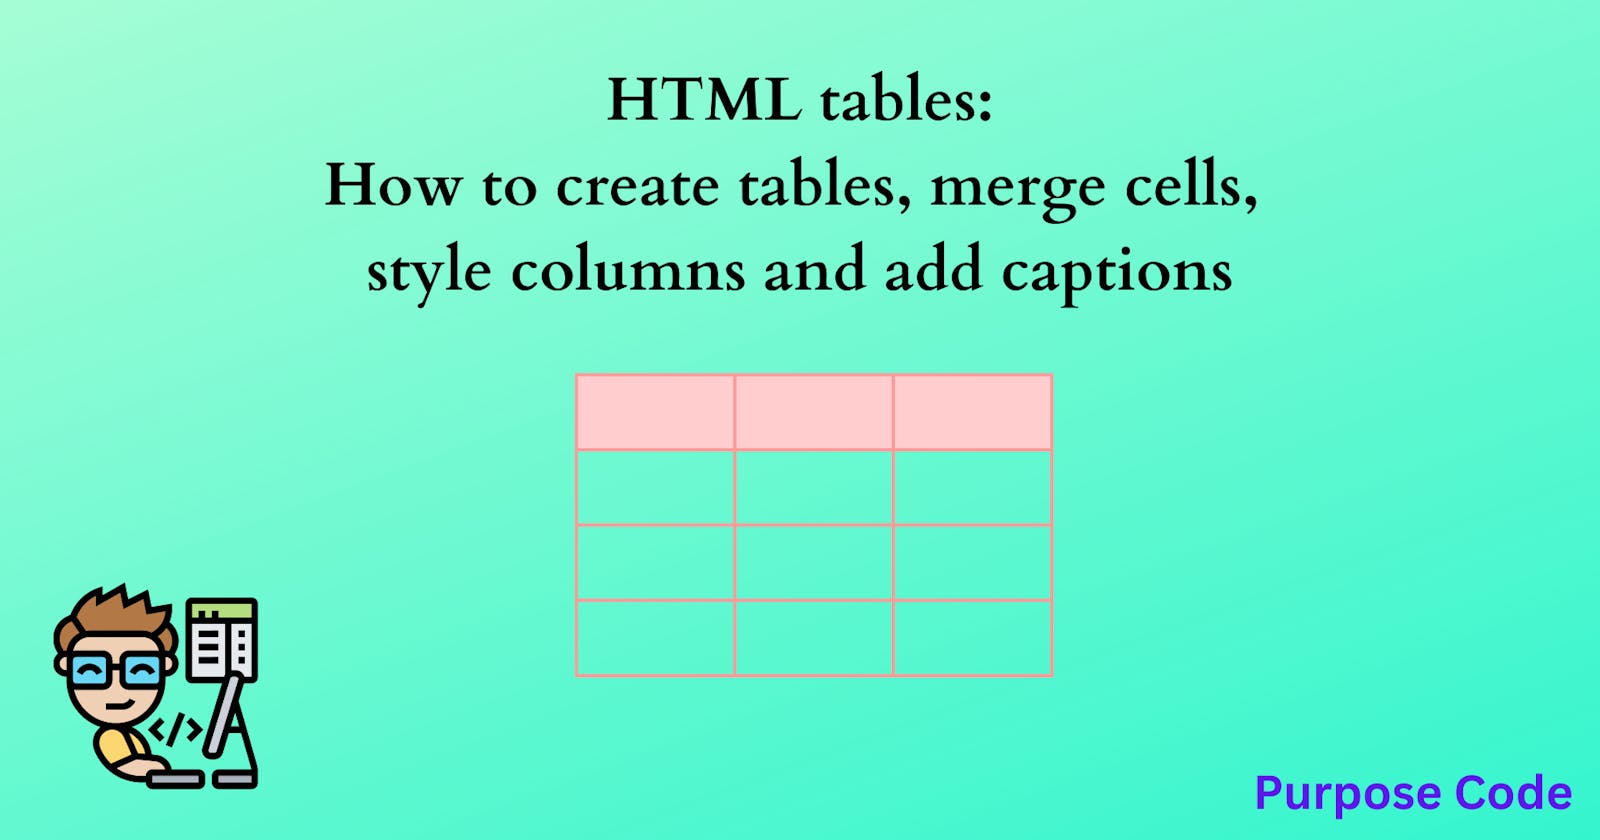 How to make tables in HTML and handle them